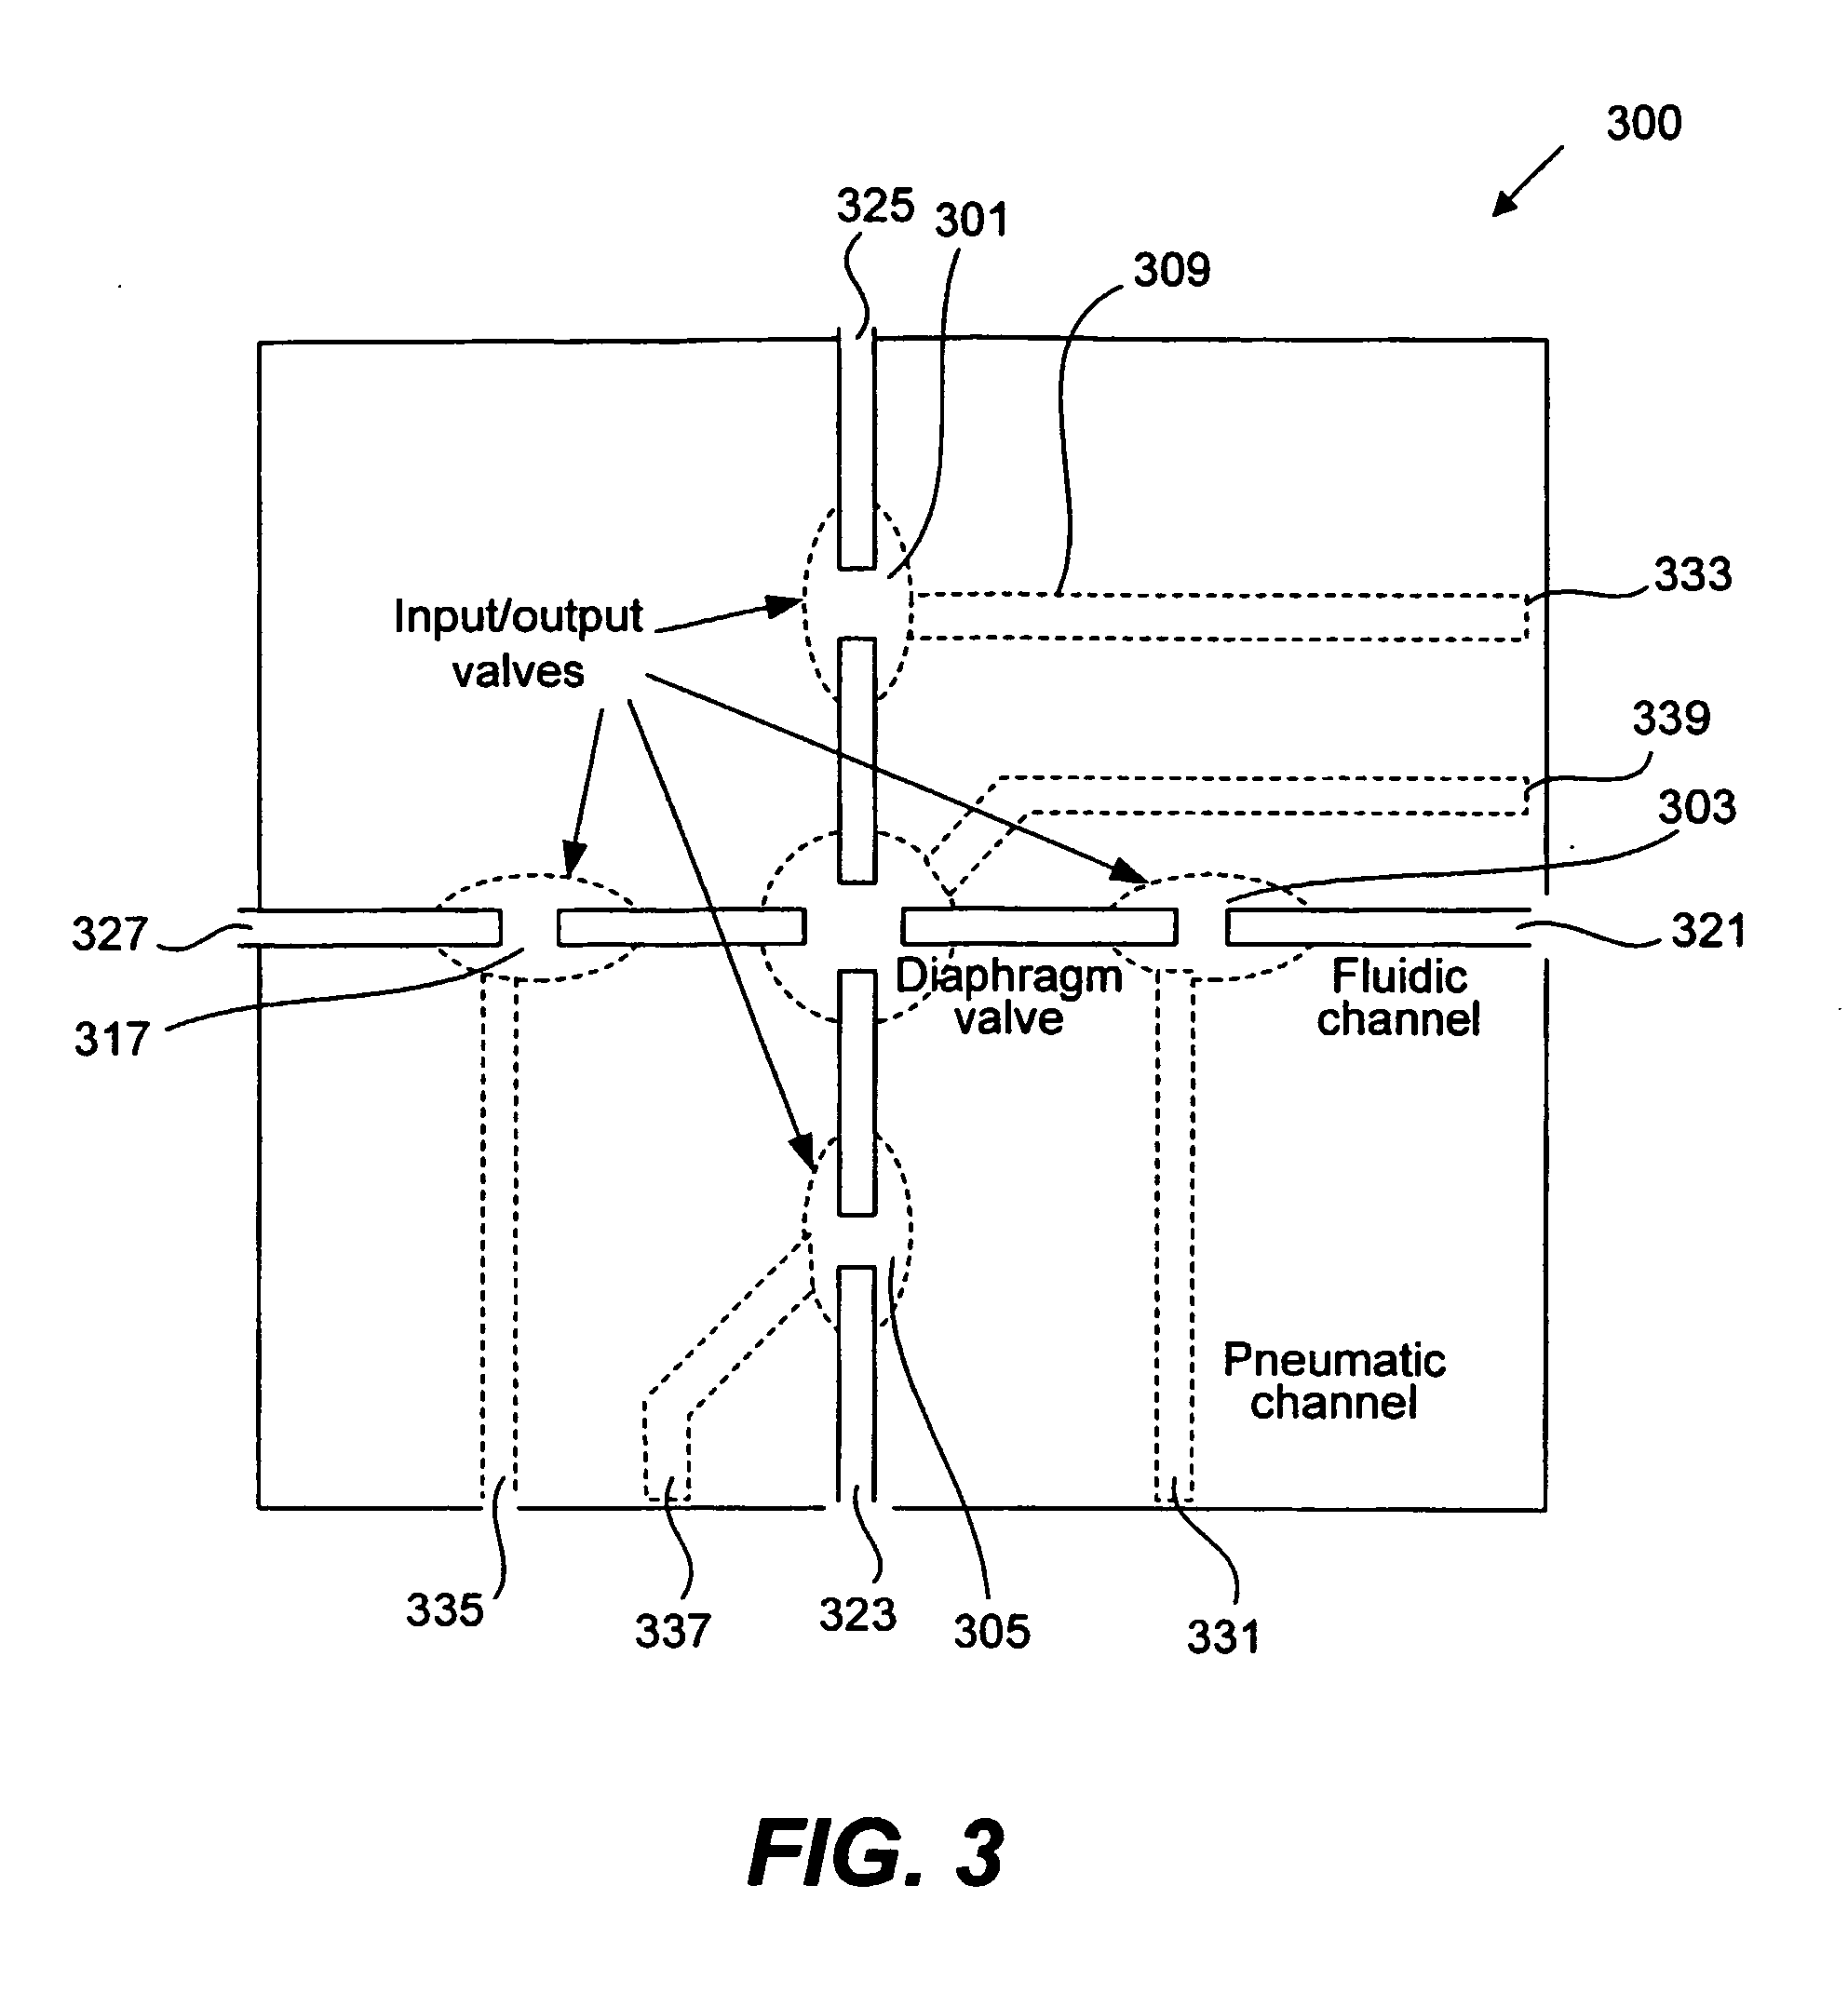 Methods and apparatus for pathogen detection and analysis